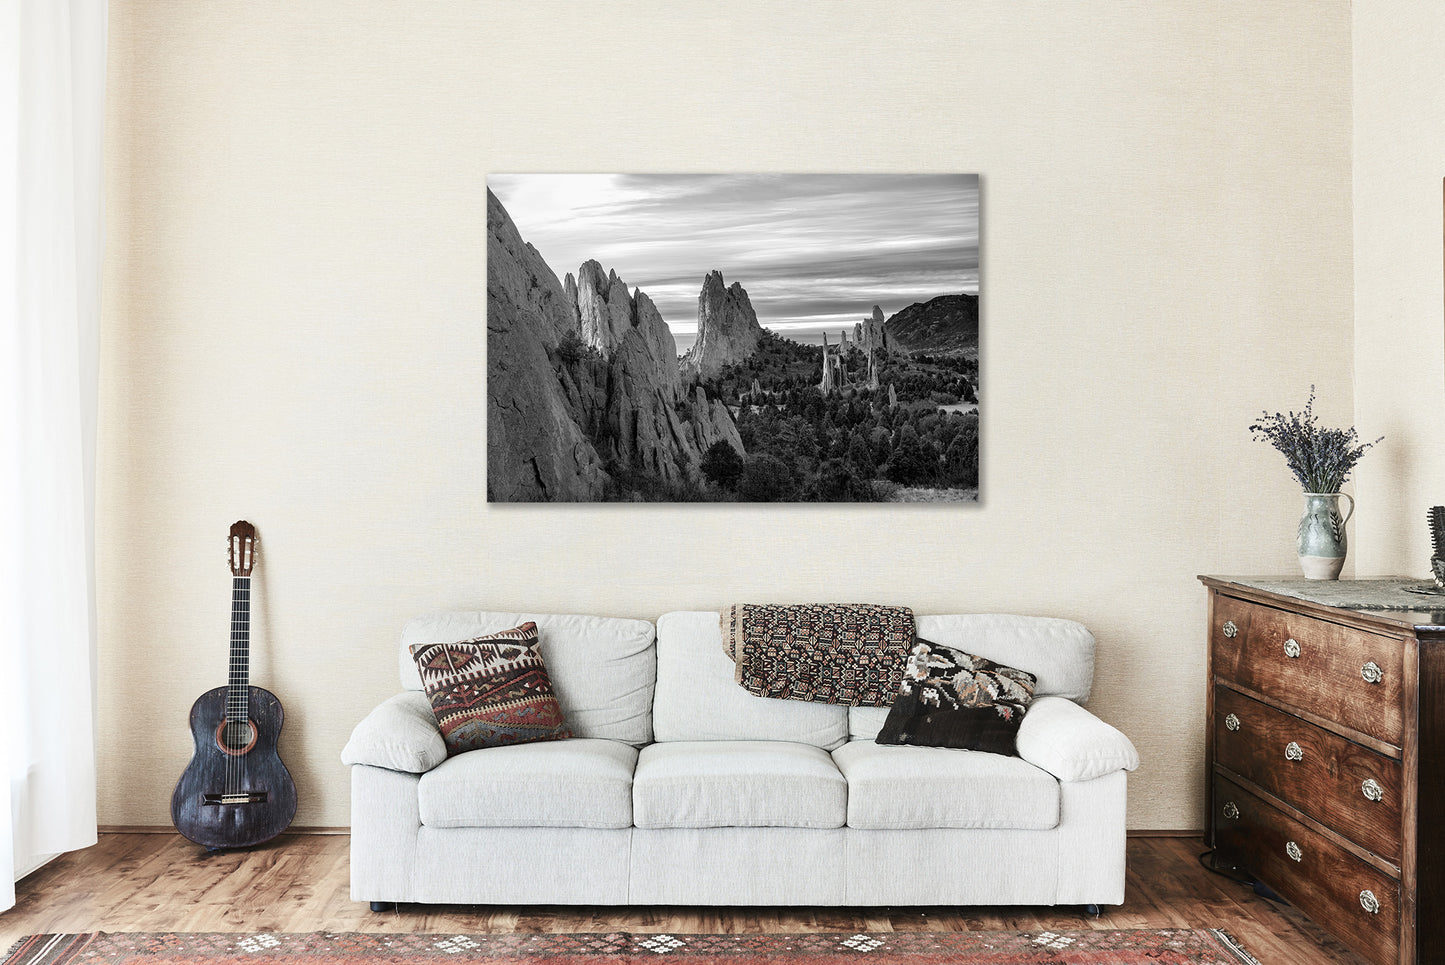 Rocky Mountain Wall Art - Metal Print of Garden of the Gods in Colorado Springs in Black and White - Western Landscape Photo Artwork Decor